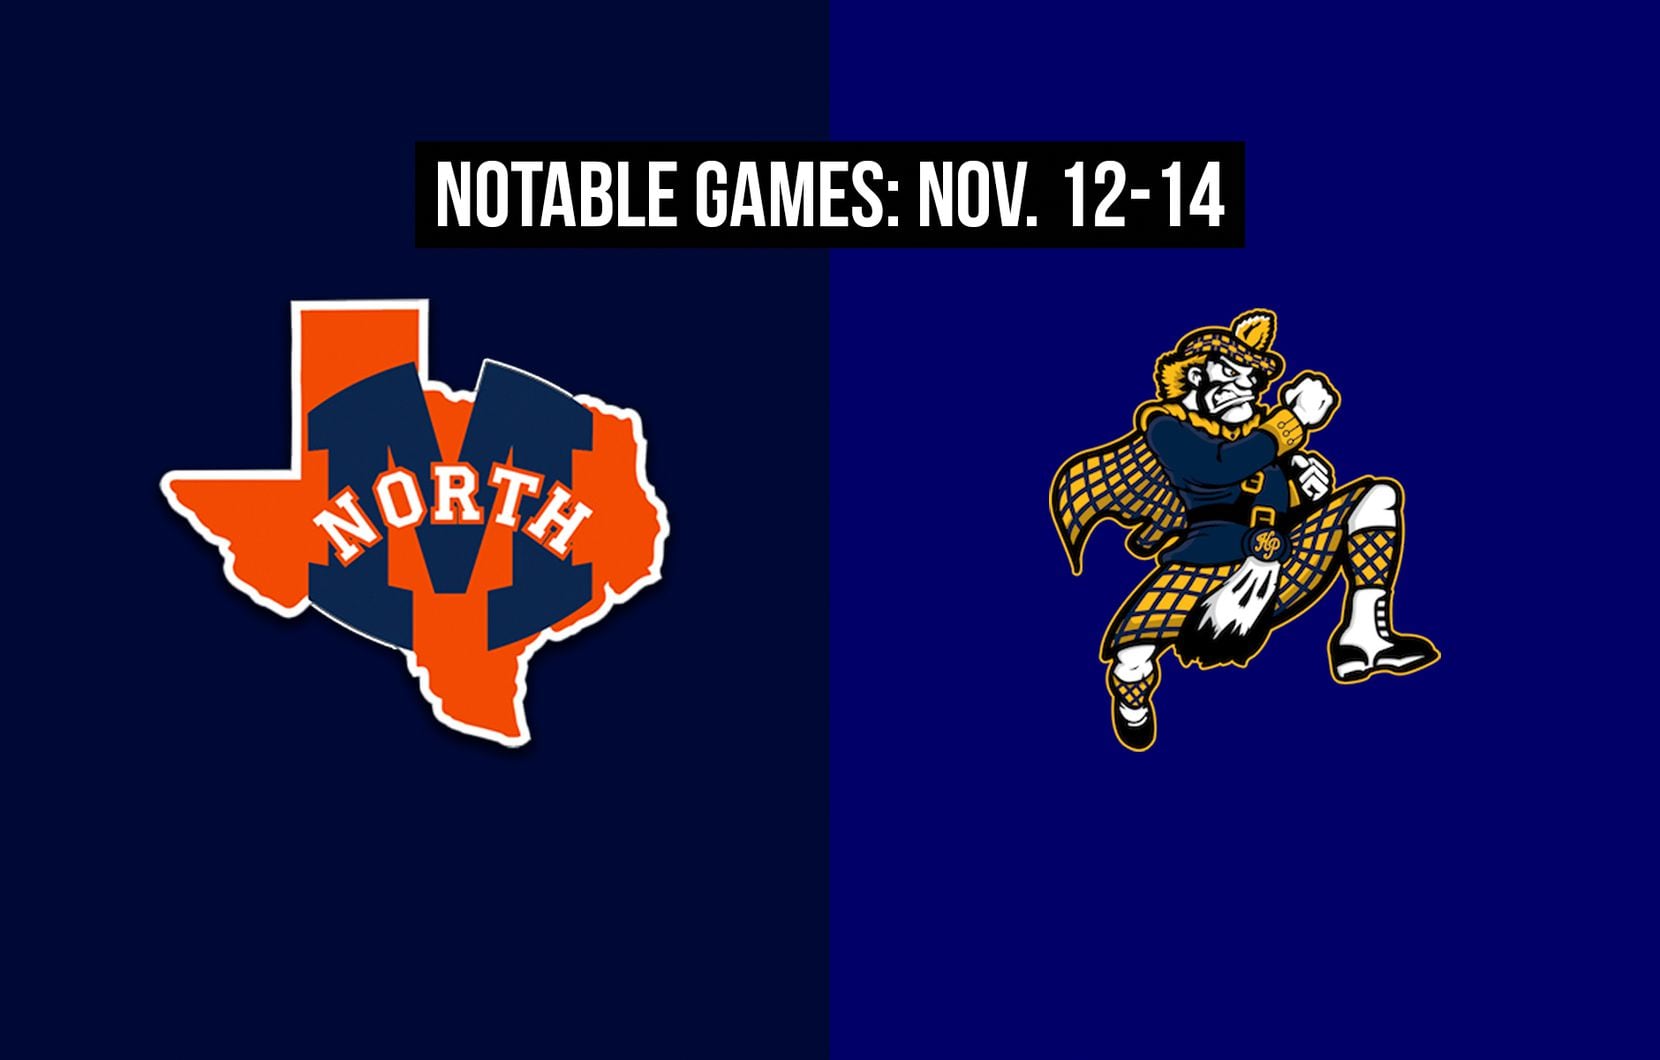 Notable games for the week of Nov. 12-14 of the 2020 season: McKinney North vs. Highland Park.